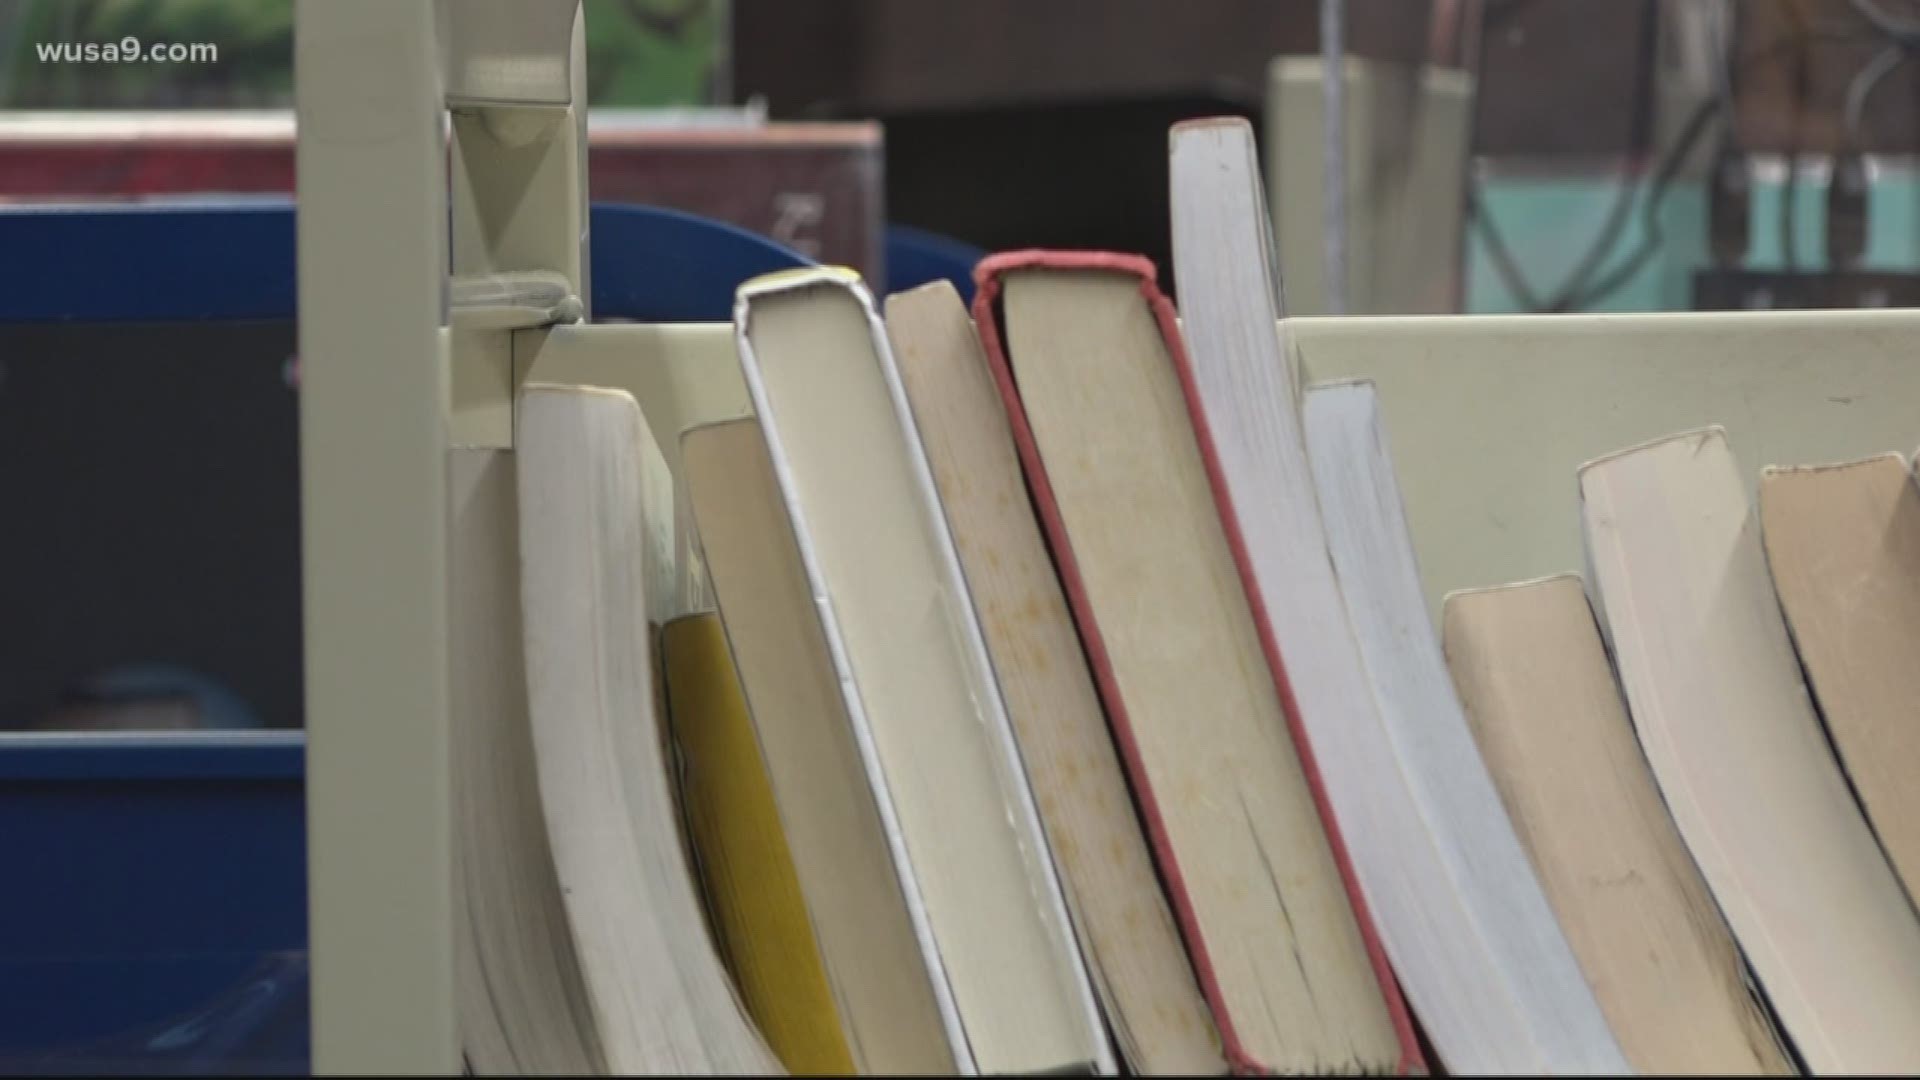 DCPS confirmed it received some petitions from principals regarding librarians after the Washington Teachers' Union said some were facing cuts.